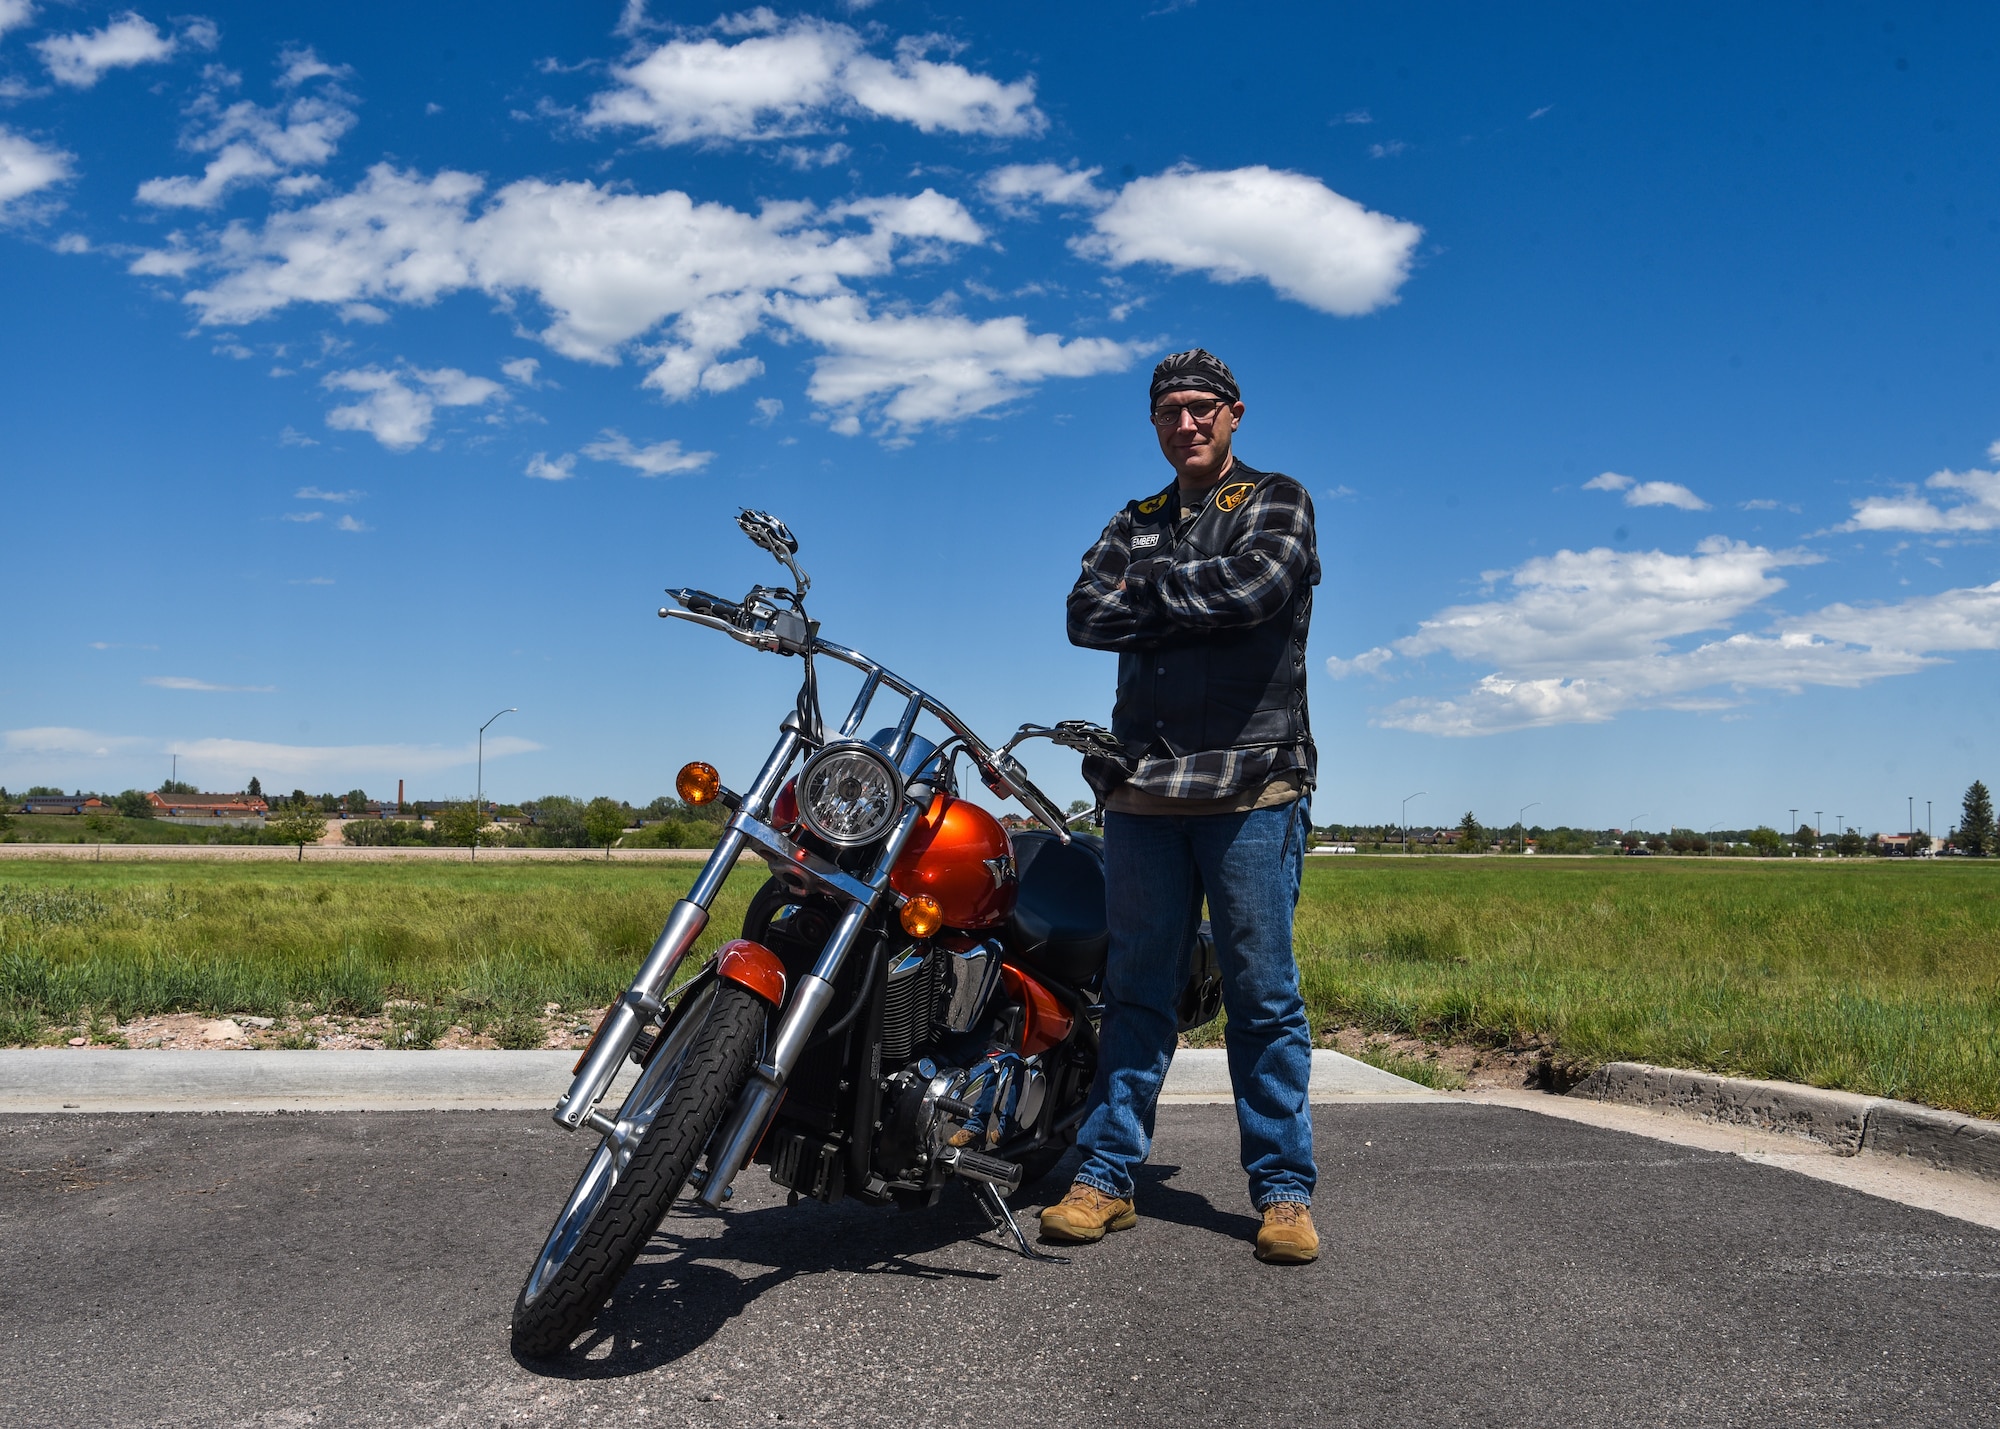 Chief Master Sgt. Beau Jones, 90th Missile Maintenance Squadron maintenance advisor, stands with his motorcycle June 20, 2019, on F.E. Warren Air Force Base, Wyo. Jones purchased his motorcycle after he was promoted to Master Sergeant and was looking for a new hobby (U.S. Air Force photo by Senior Airman Braydon Williams)